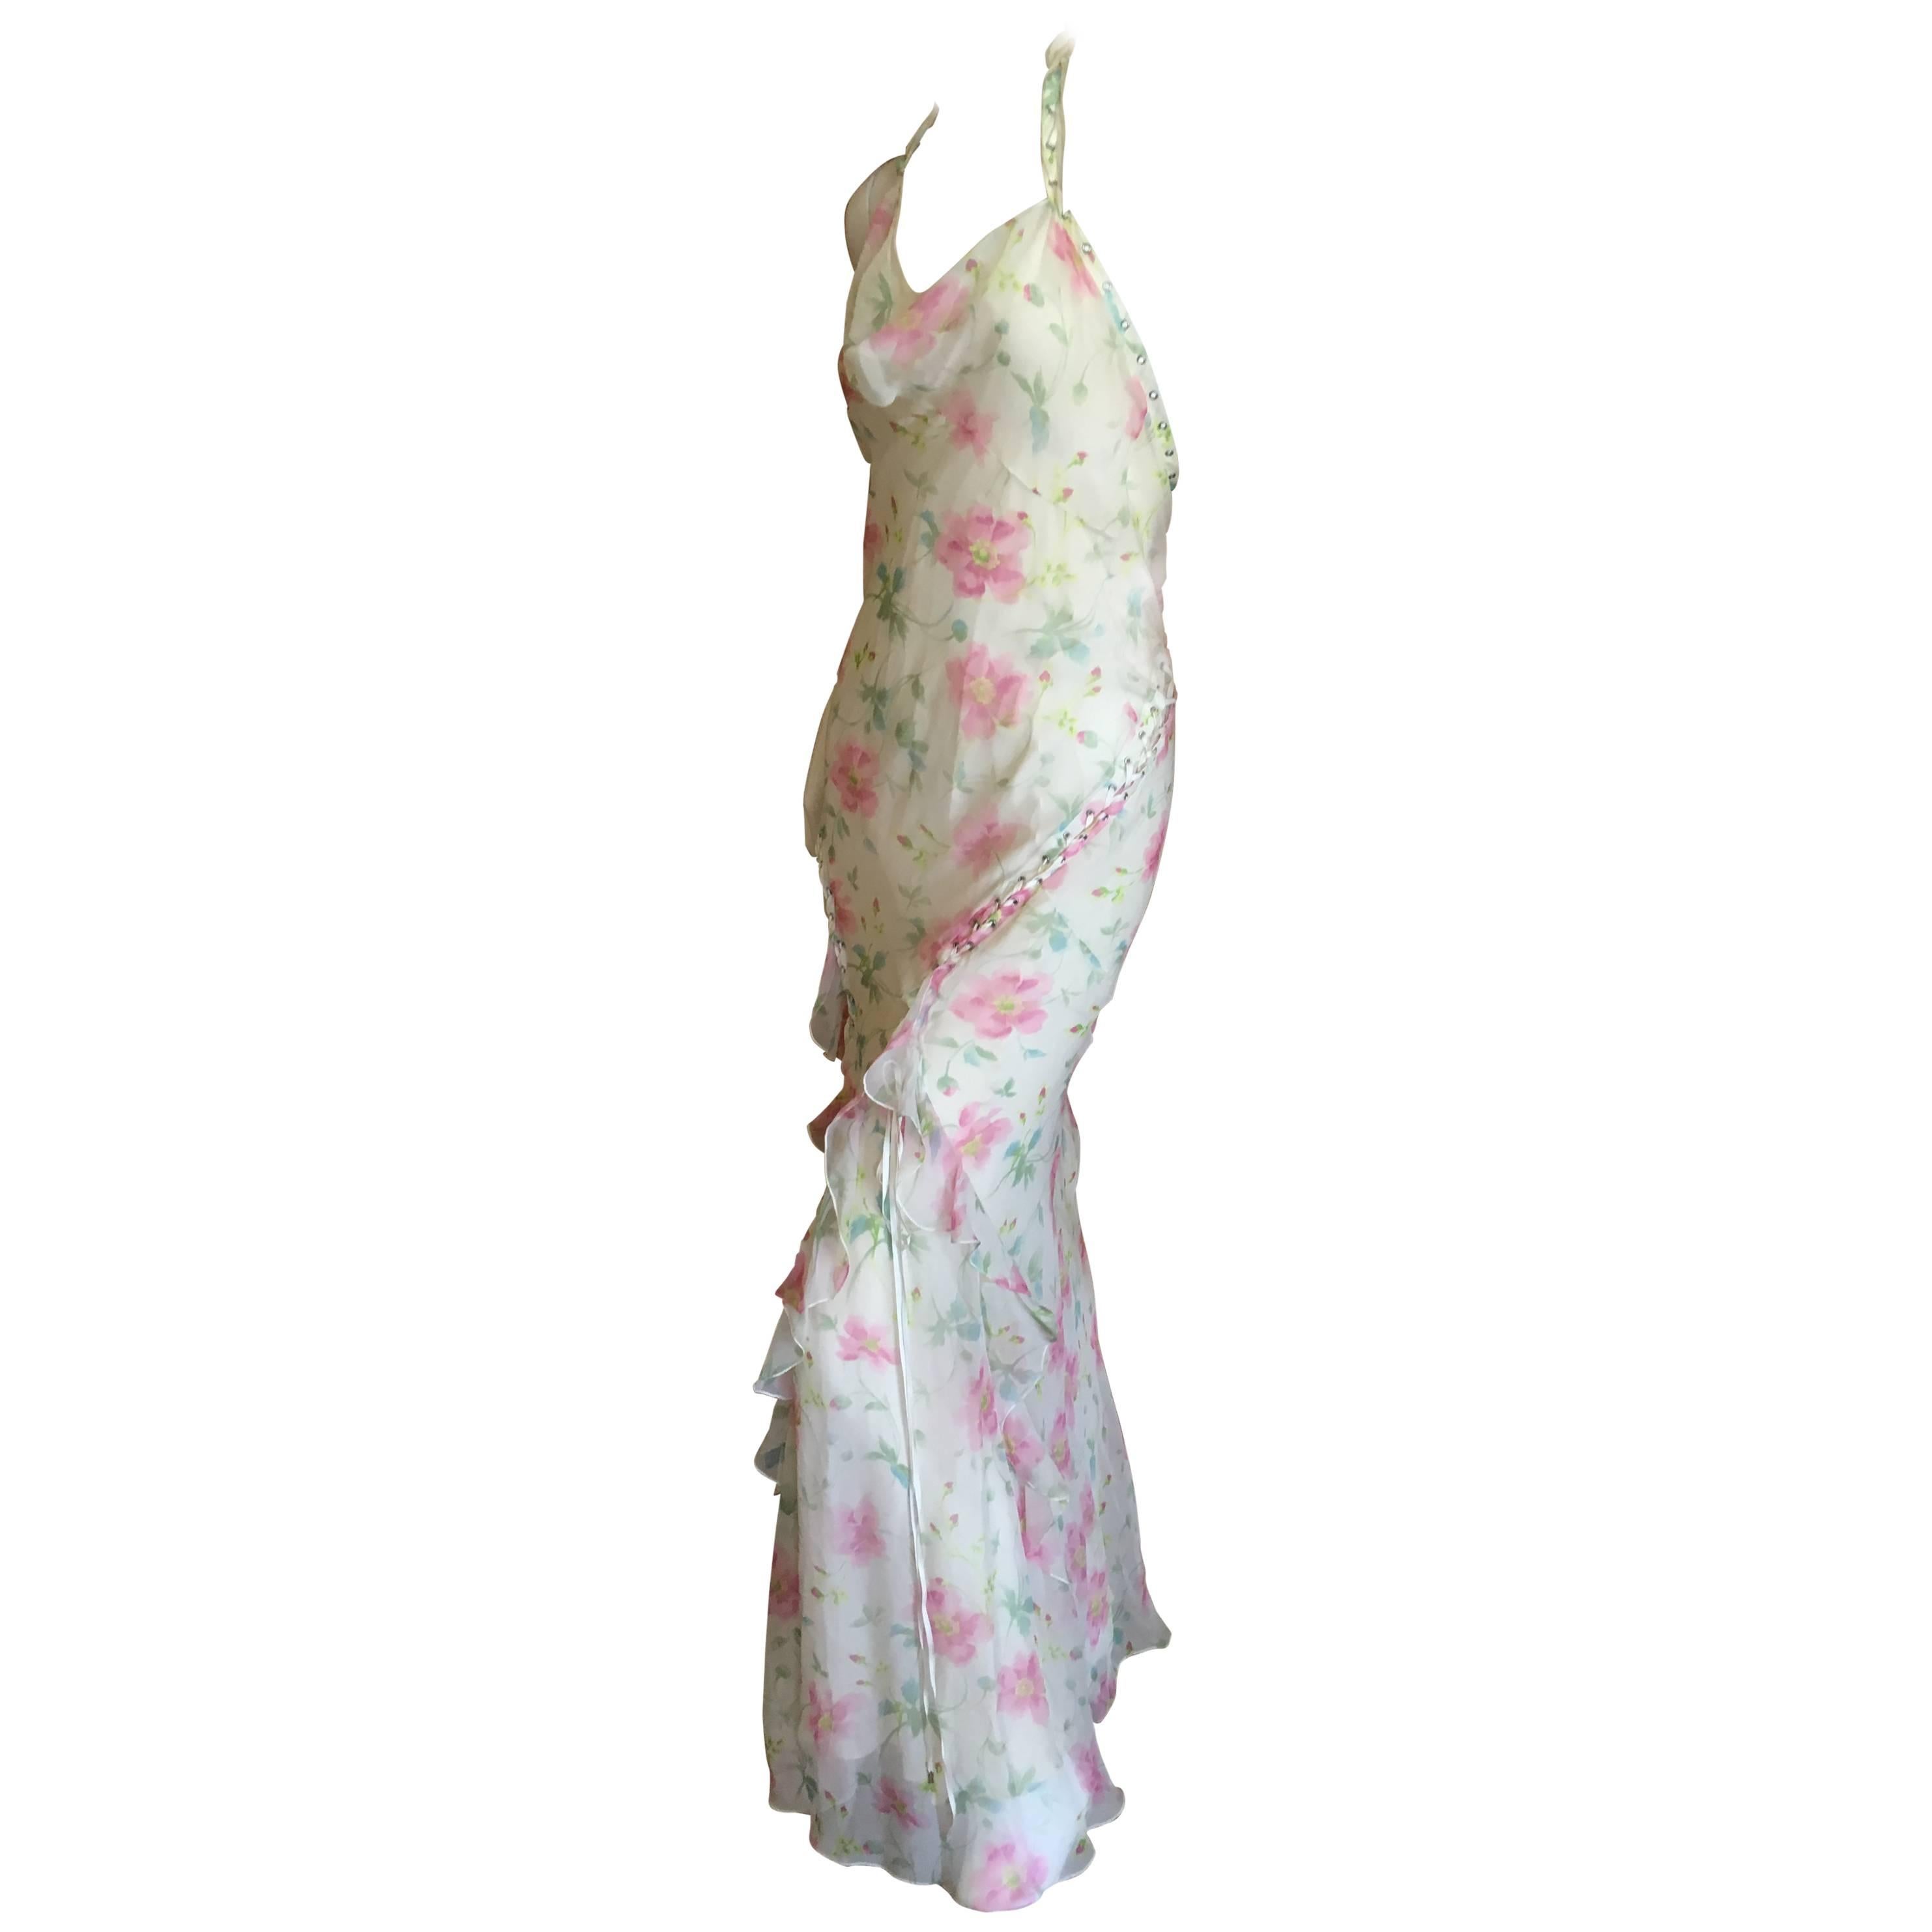 Dior by Galliano Sweet Ruffled Silk Floral Dress with Corset Lace Details